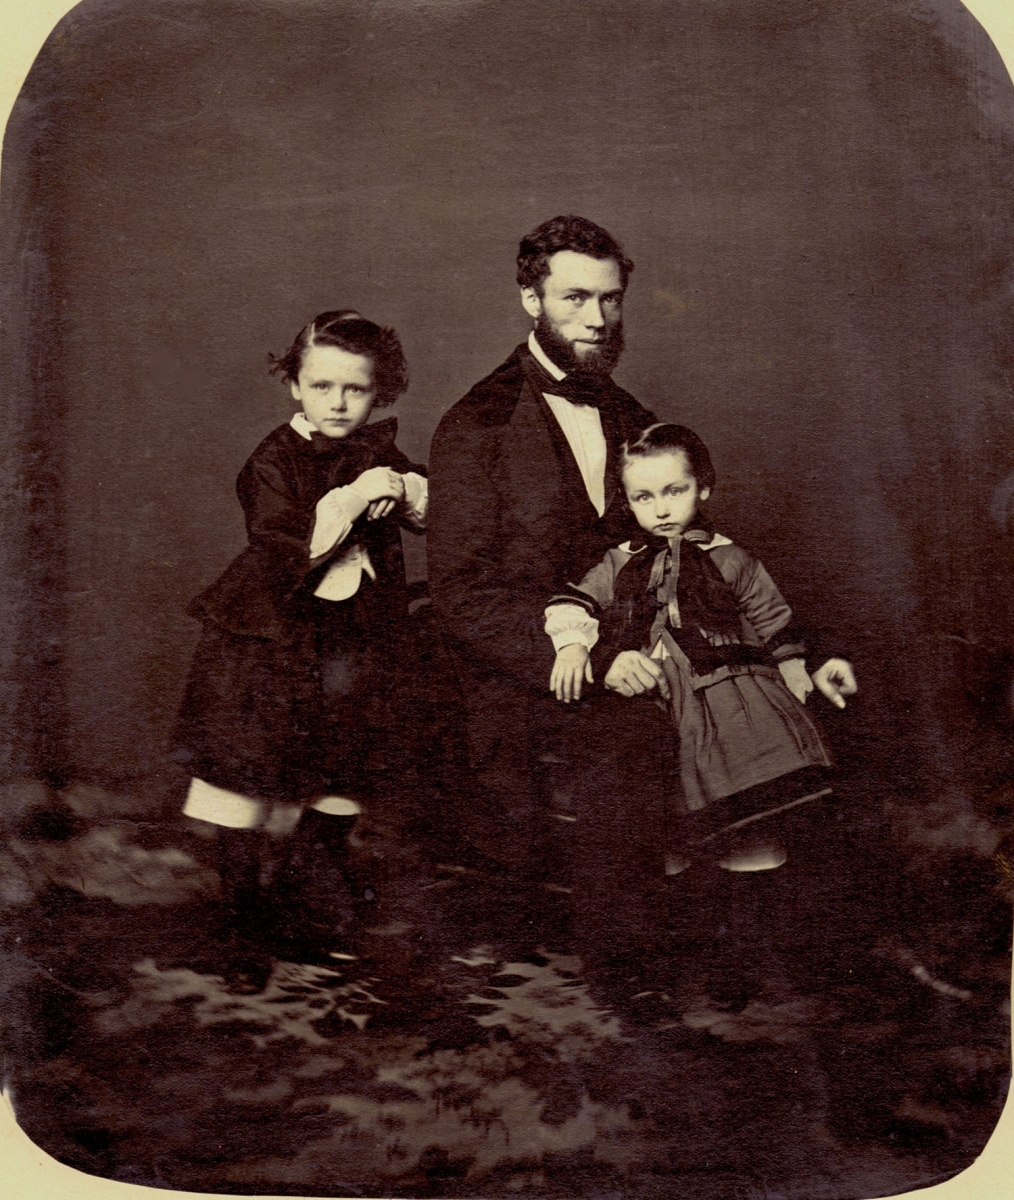 Portrait of the Photographer Alfred Coulon with His Children, Henri and Gustave Coulon